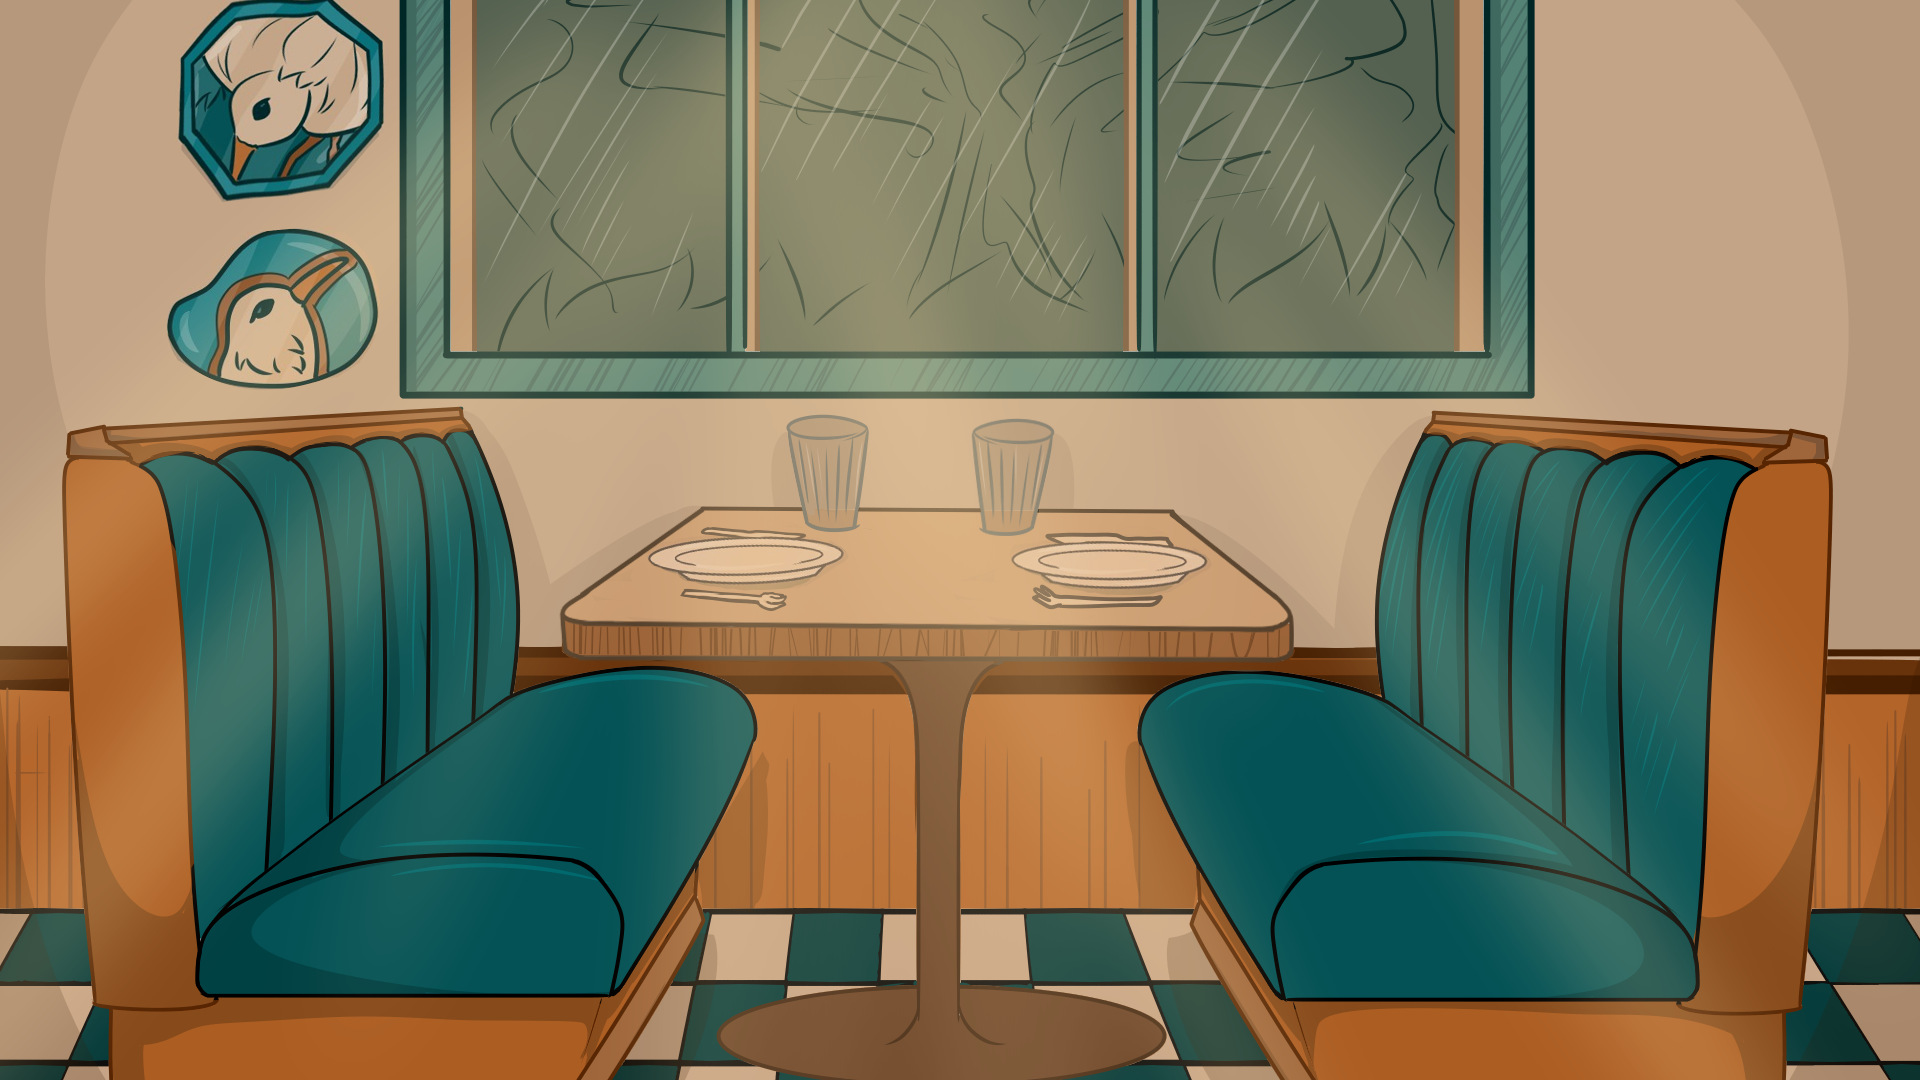 Illustration of diner seating booth